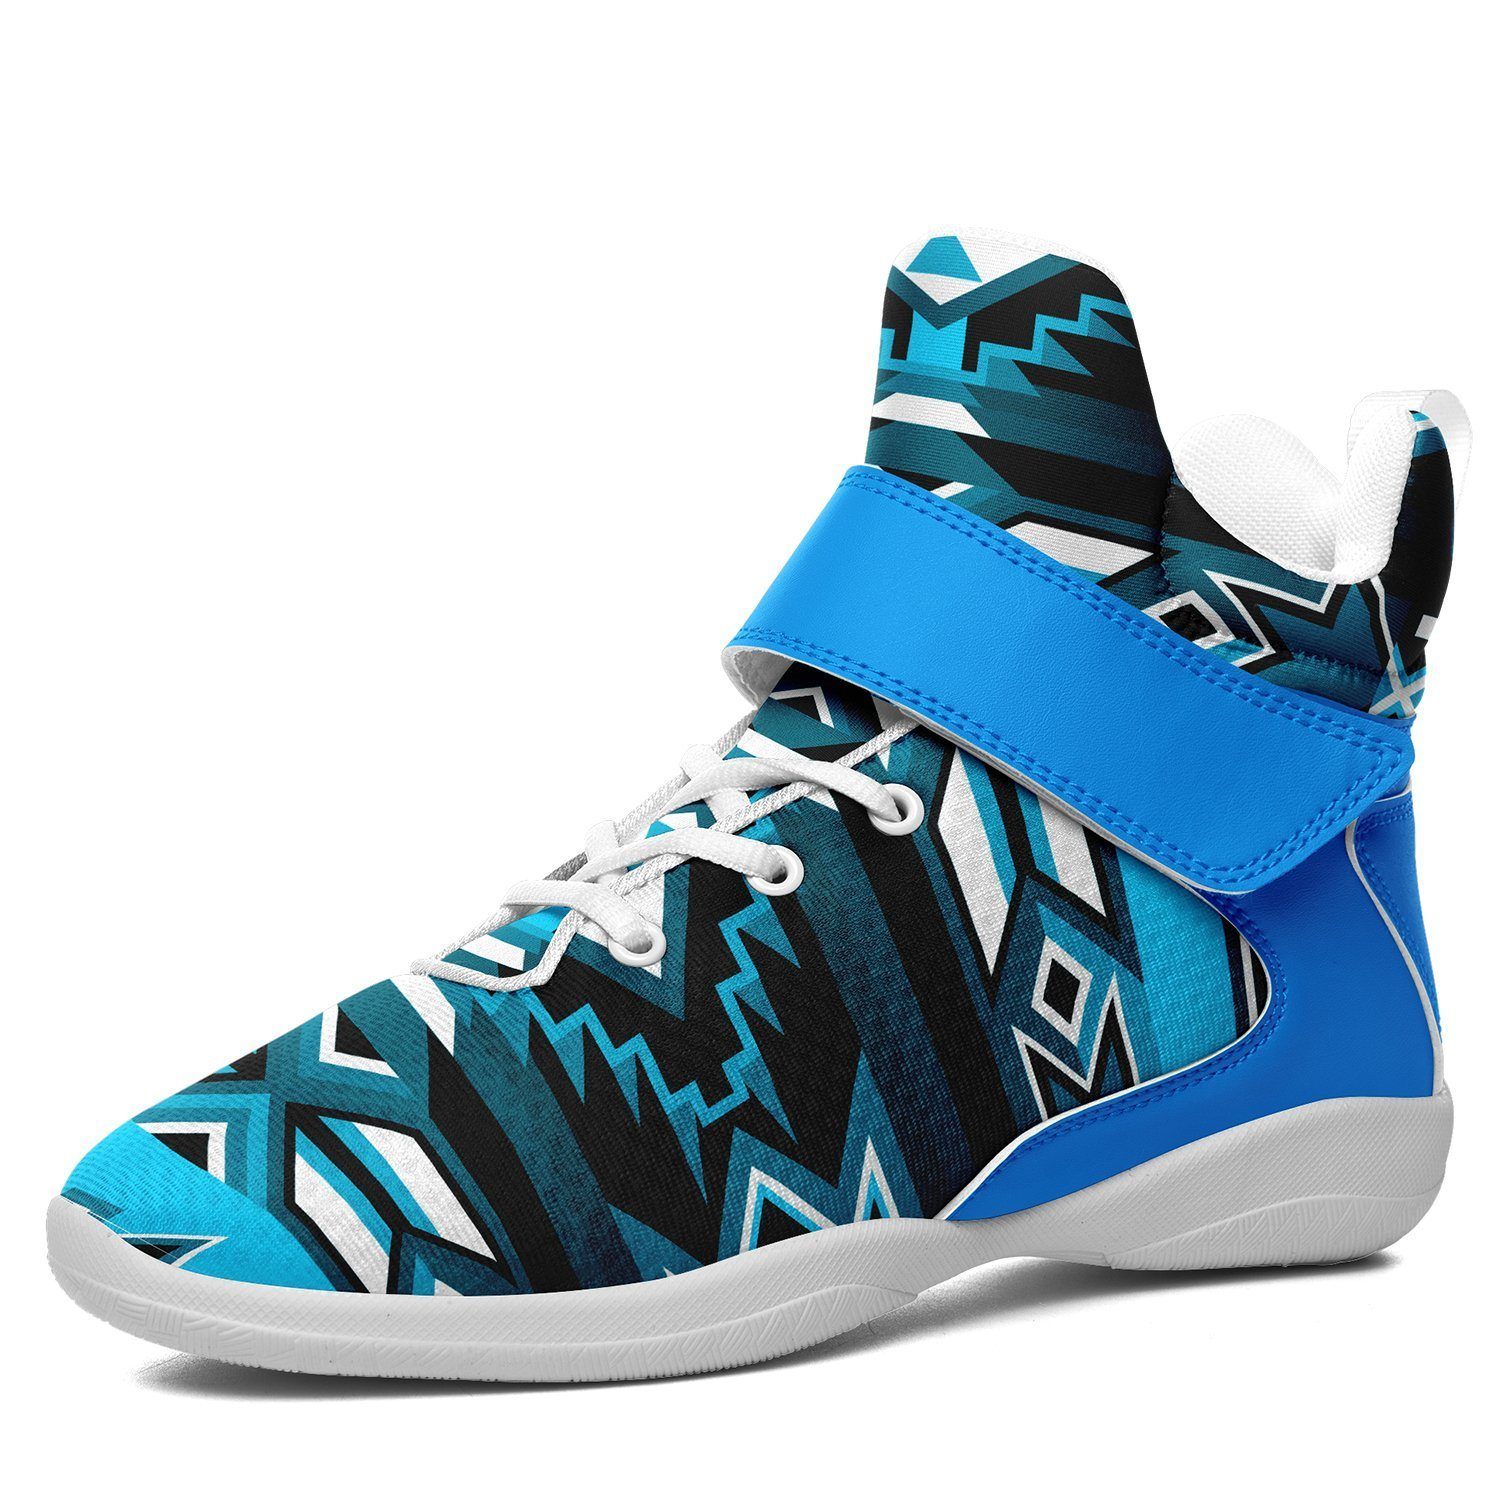 Northern Journey Ipottaa Basketball / Sport High Top Shoes - White Sole 49 Dzine US Men 7 / EUR 40 White Sole with Light Blue Strap 